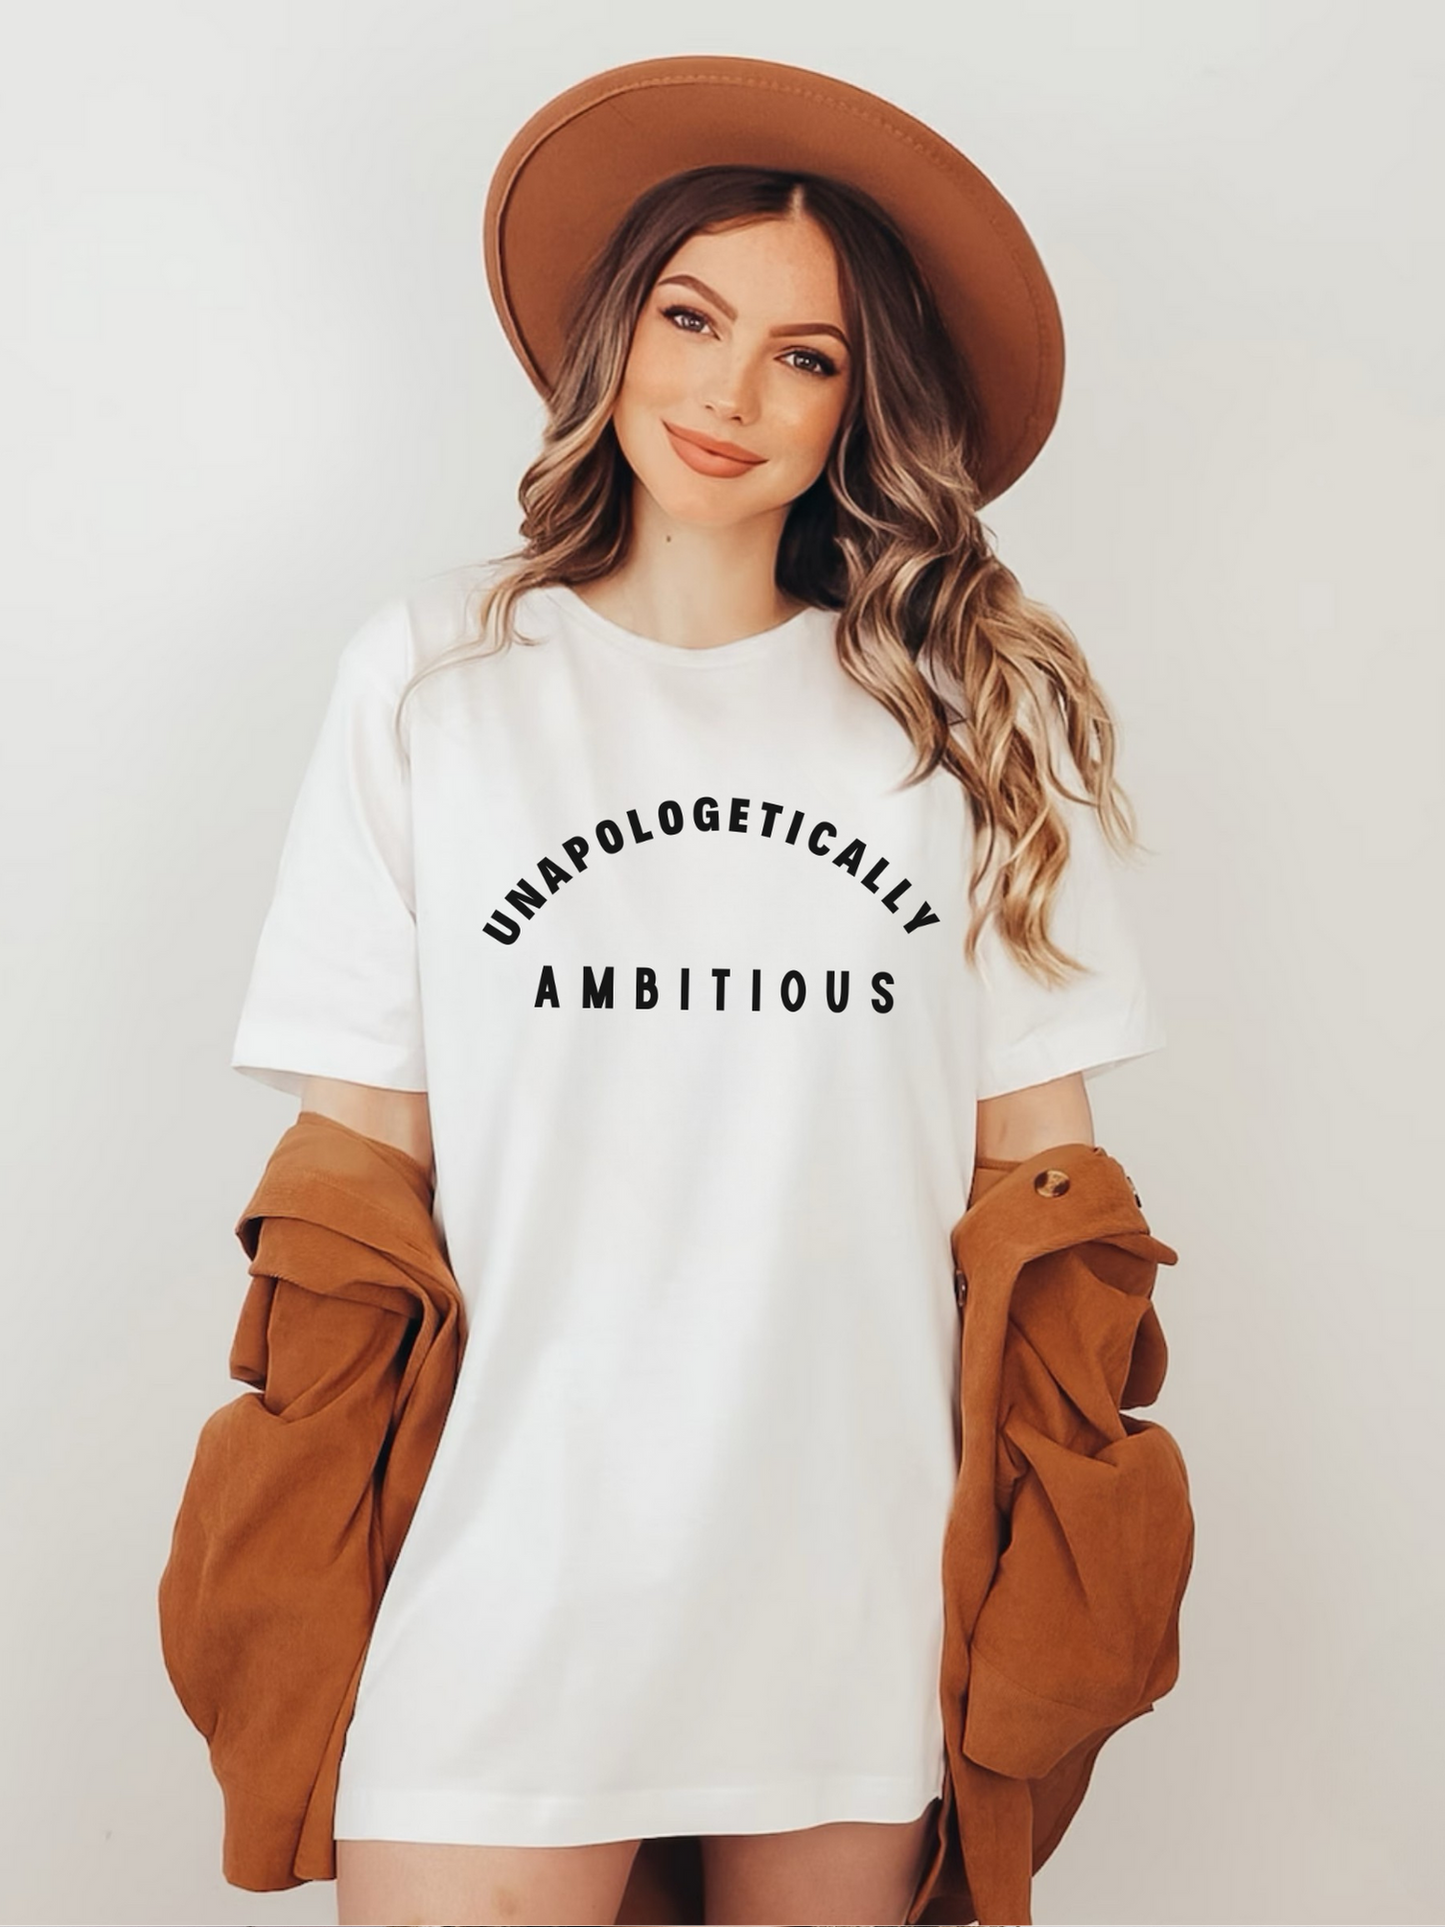 Unapologetically Ambitious Tee